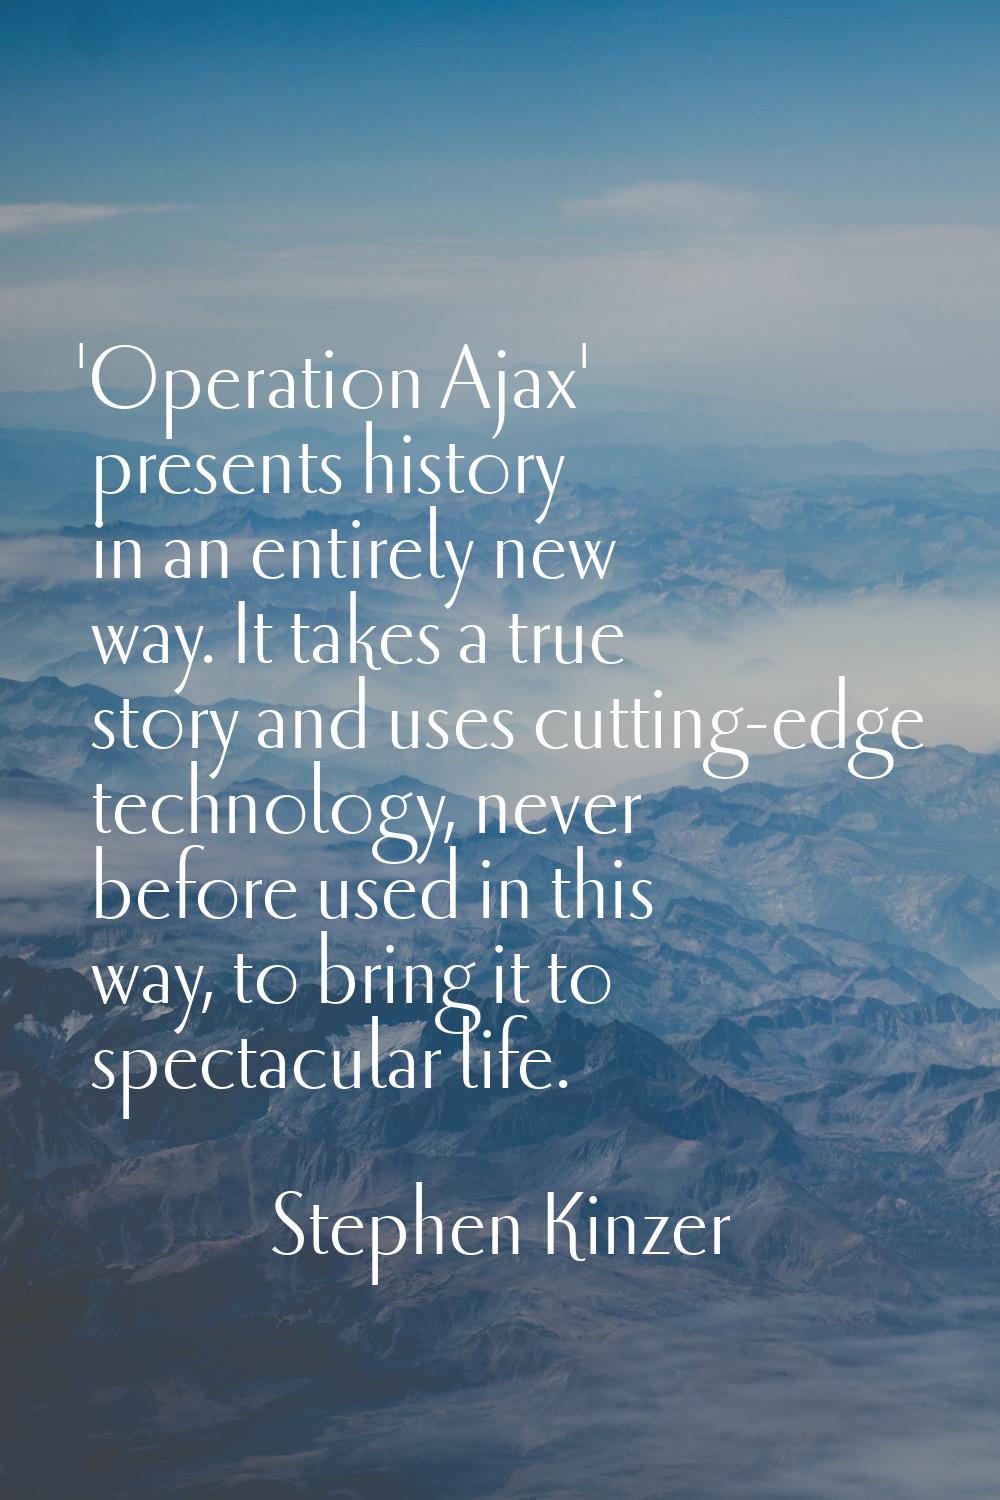 'Operation Ajax' presents history in an entirely new way. It takes a true story and uses cutting-ed